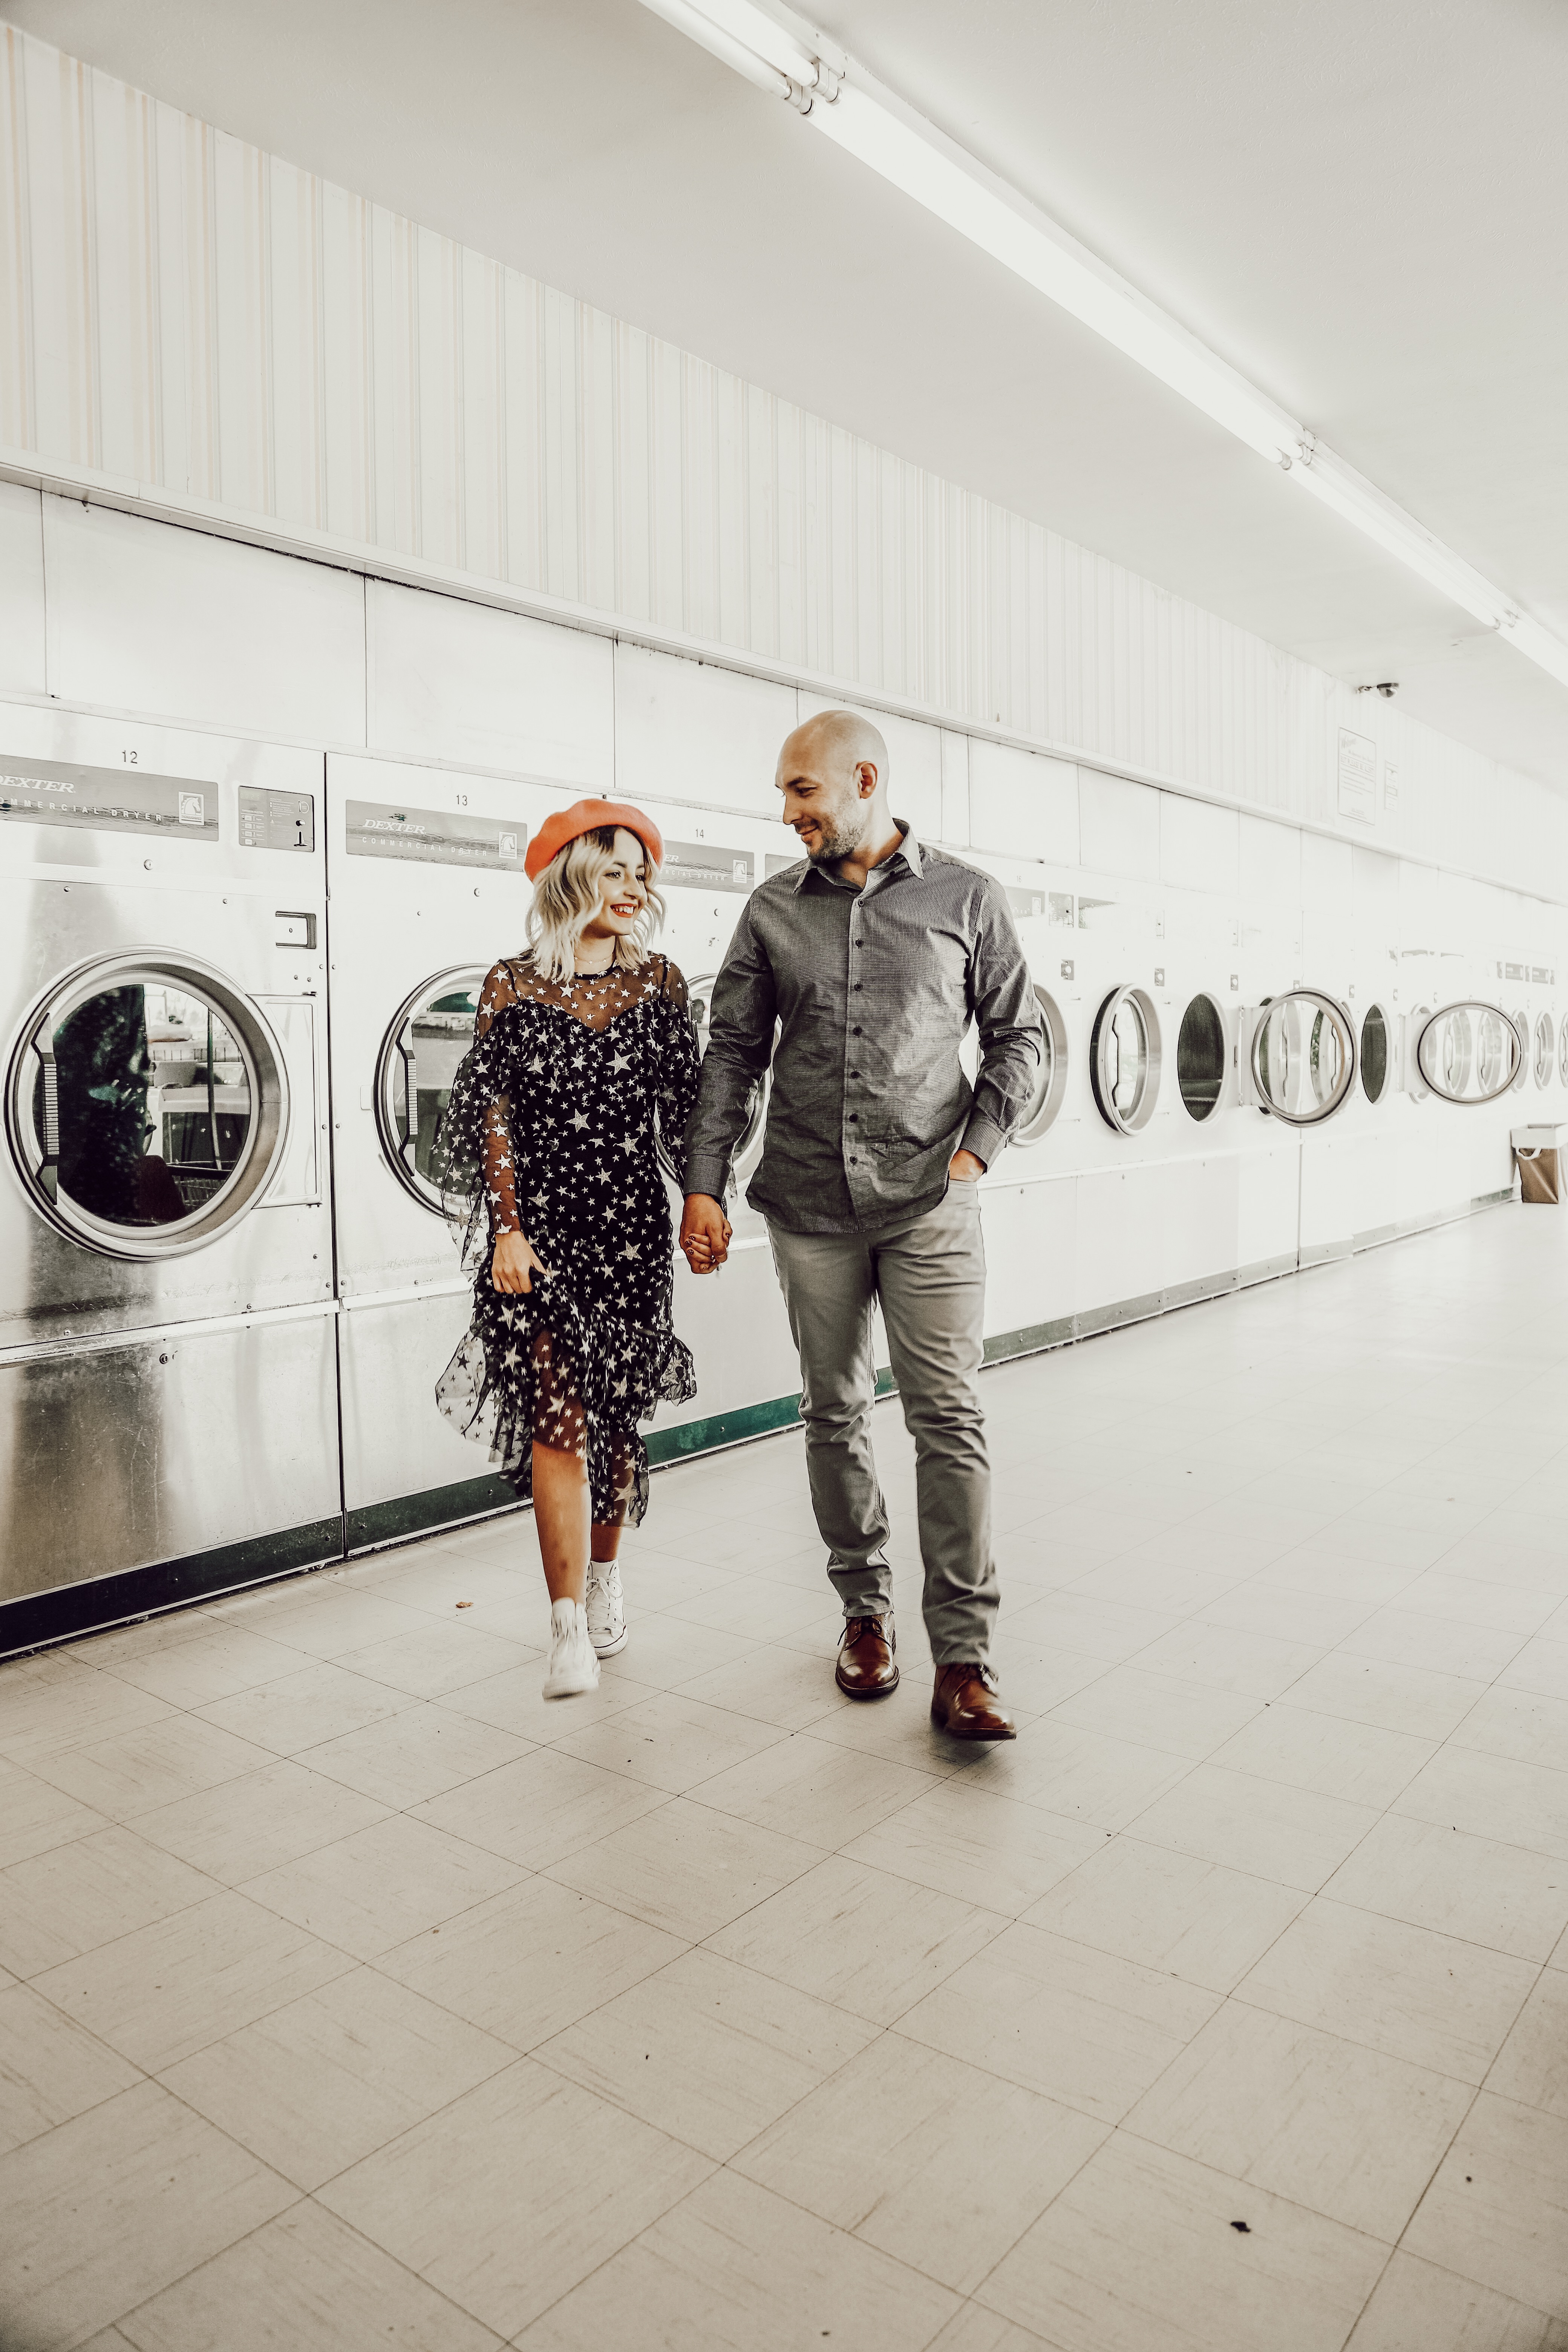 Alena Gidenko of modaprints.com shares her photoshoot with her hubby for Valentines Day at the Laundry Mat 